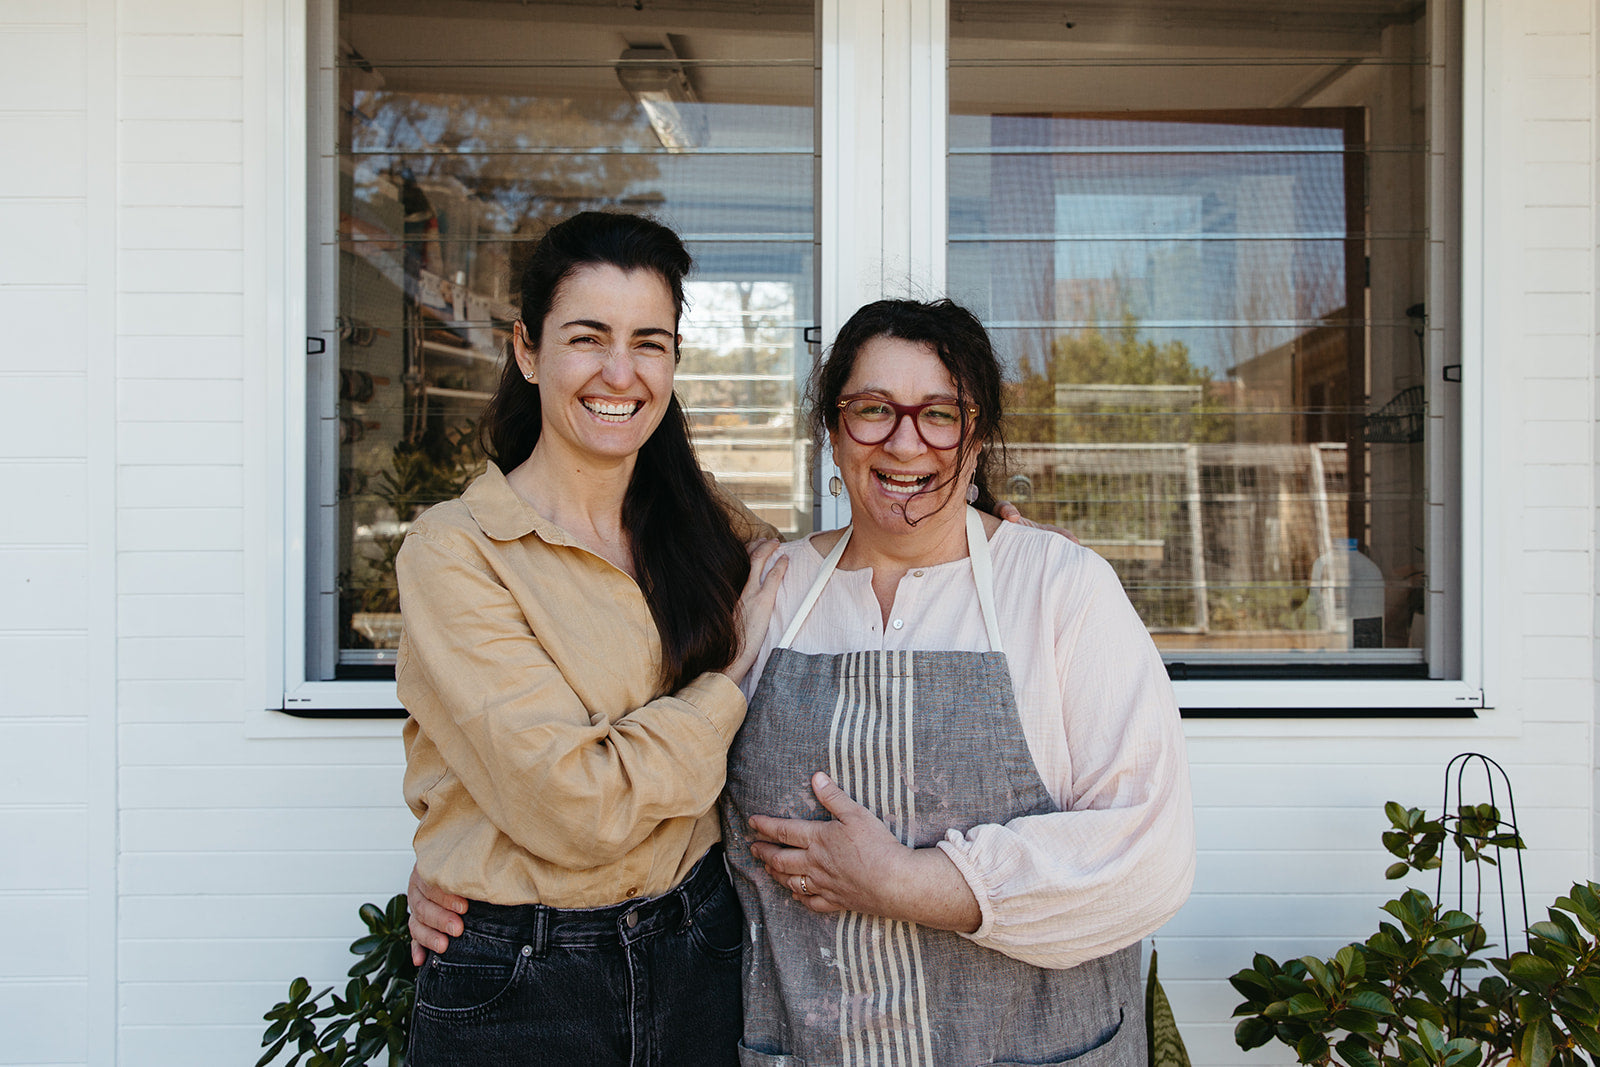 Palinopsia founder Tamara Bajic and Newcastle ceramist Elkie Fairbrother embrace and discuss all things ceramics for Australia's handmade ceramic obsessed community